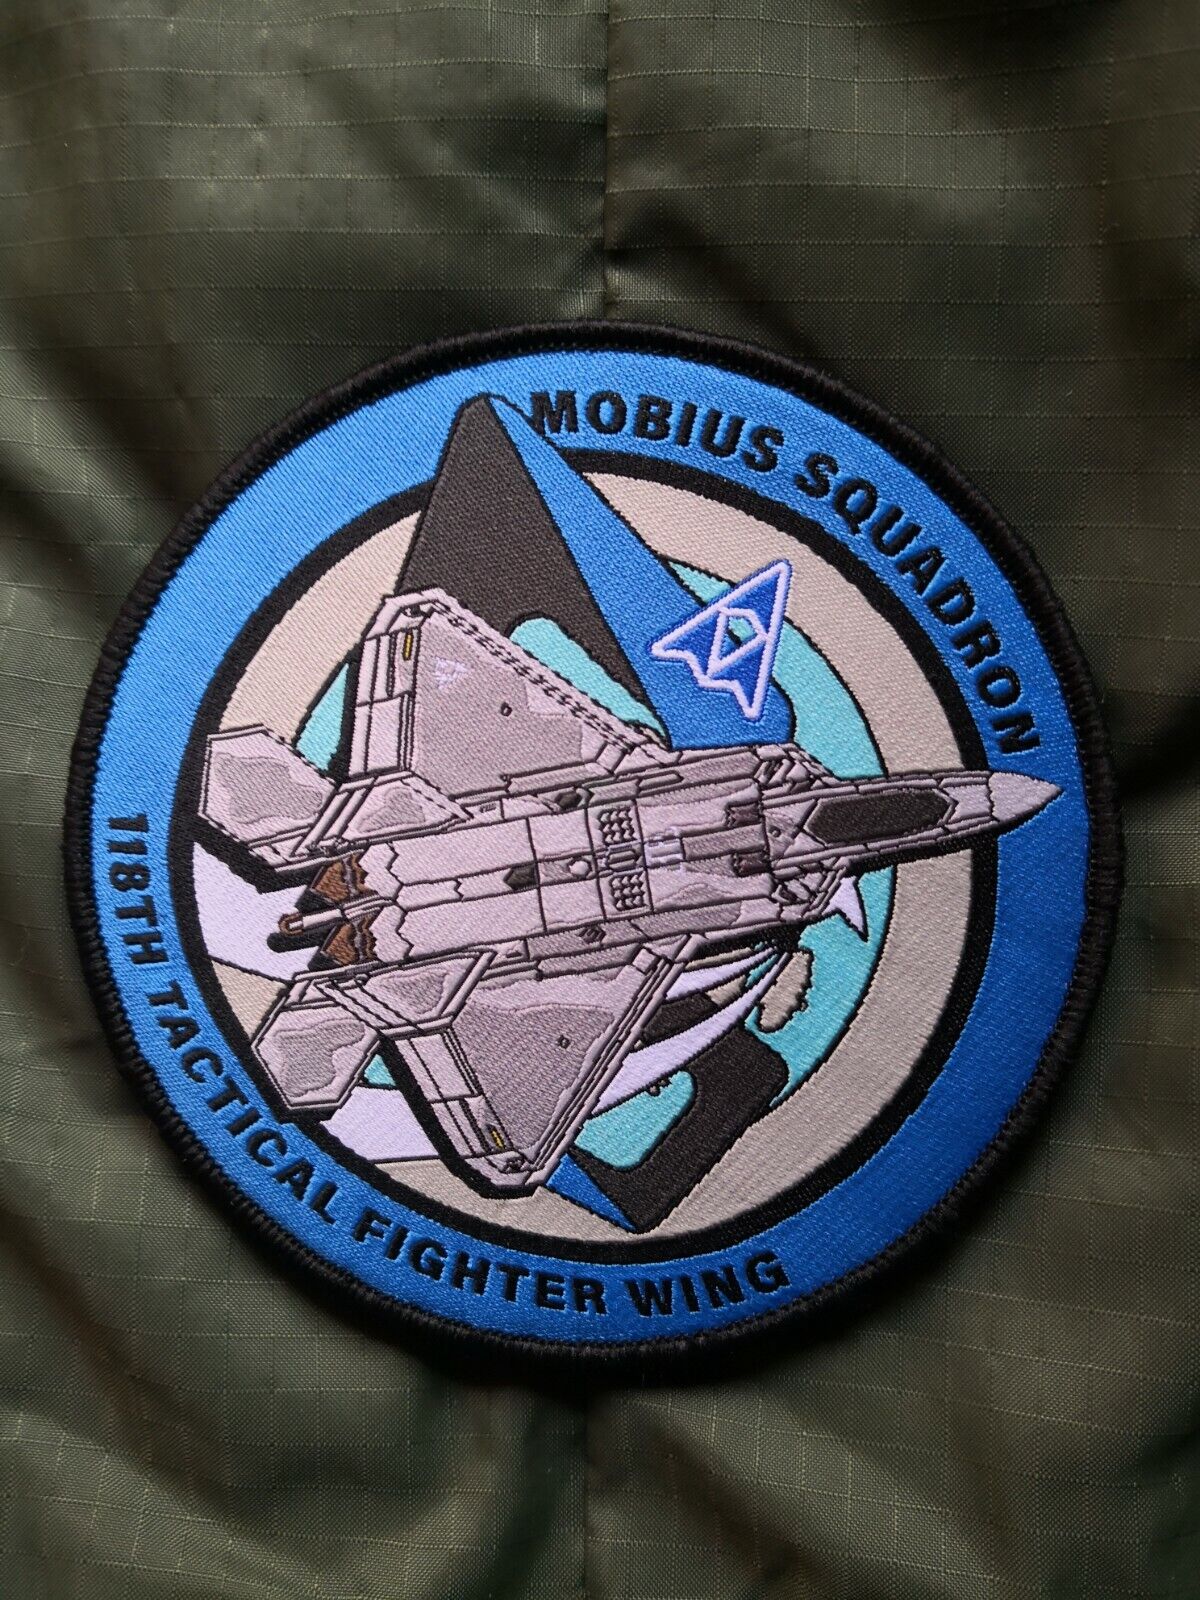 Ace Combat 4, ISAF mobius, F-22 Raptor, aircraft military morale fighter patch